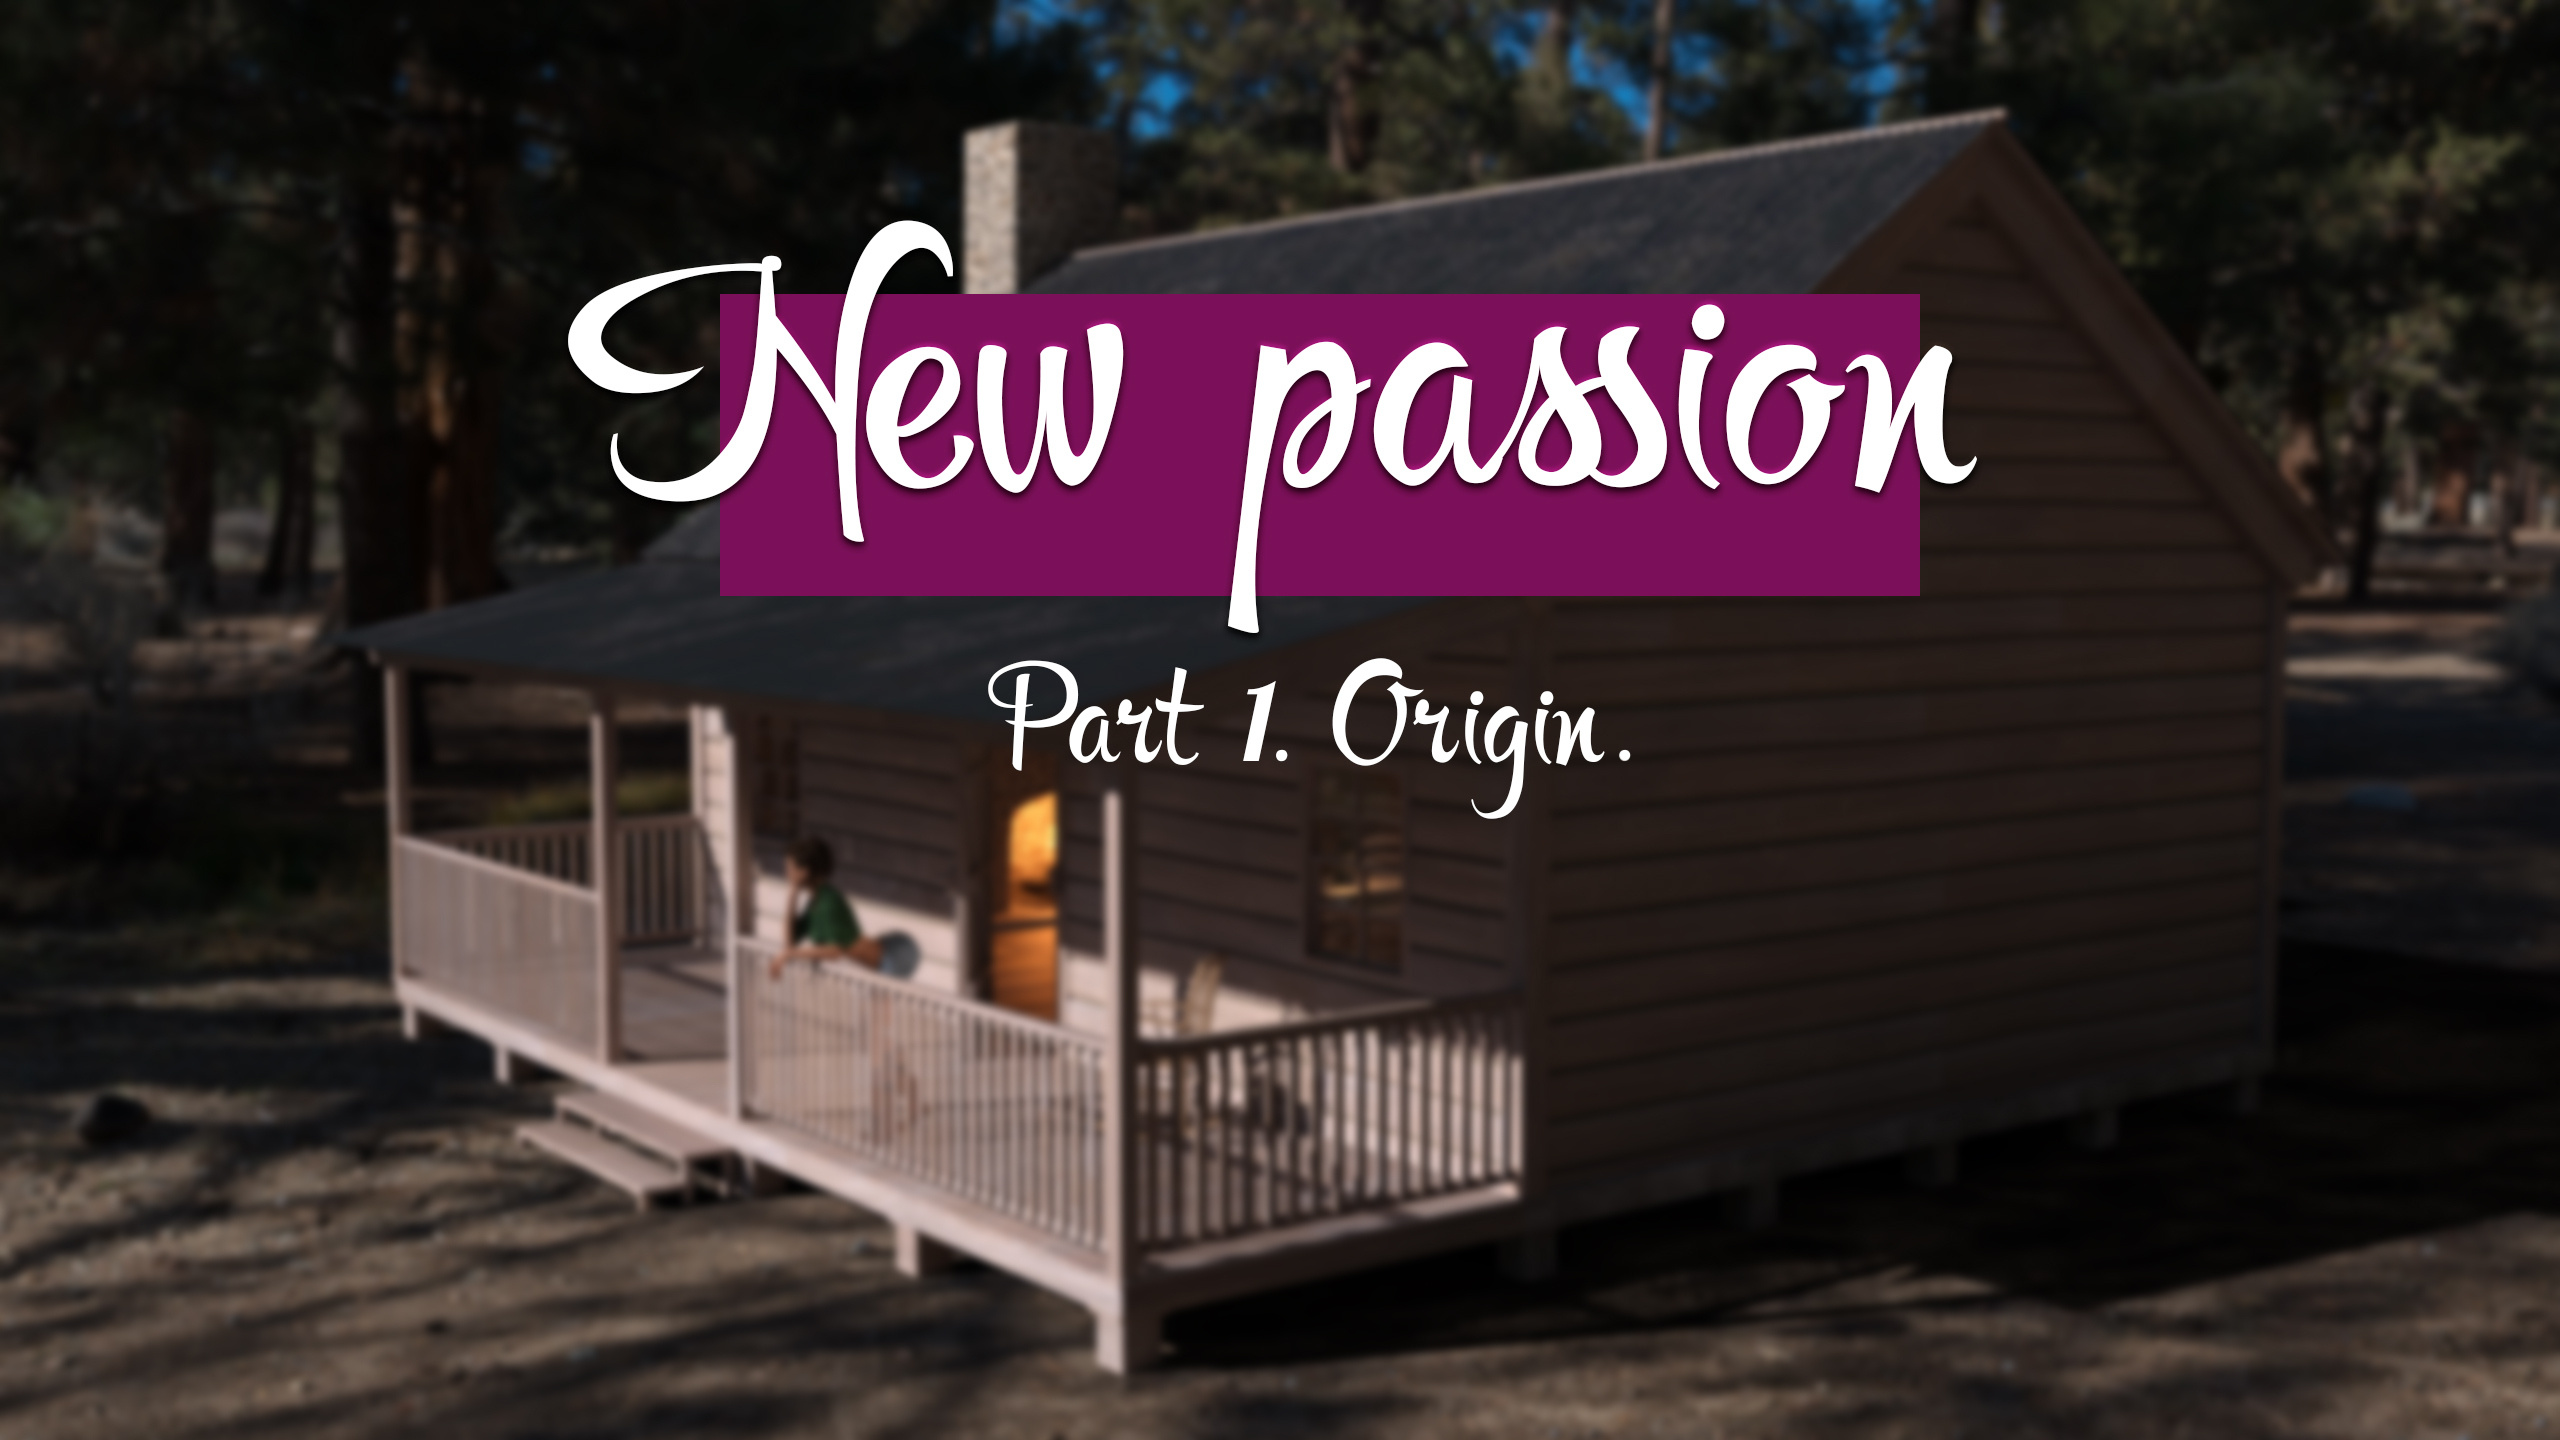 New Passion Part 1 by Paradox3D